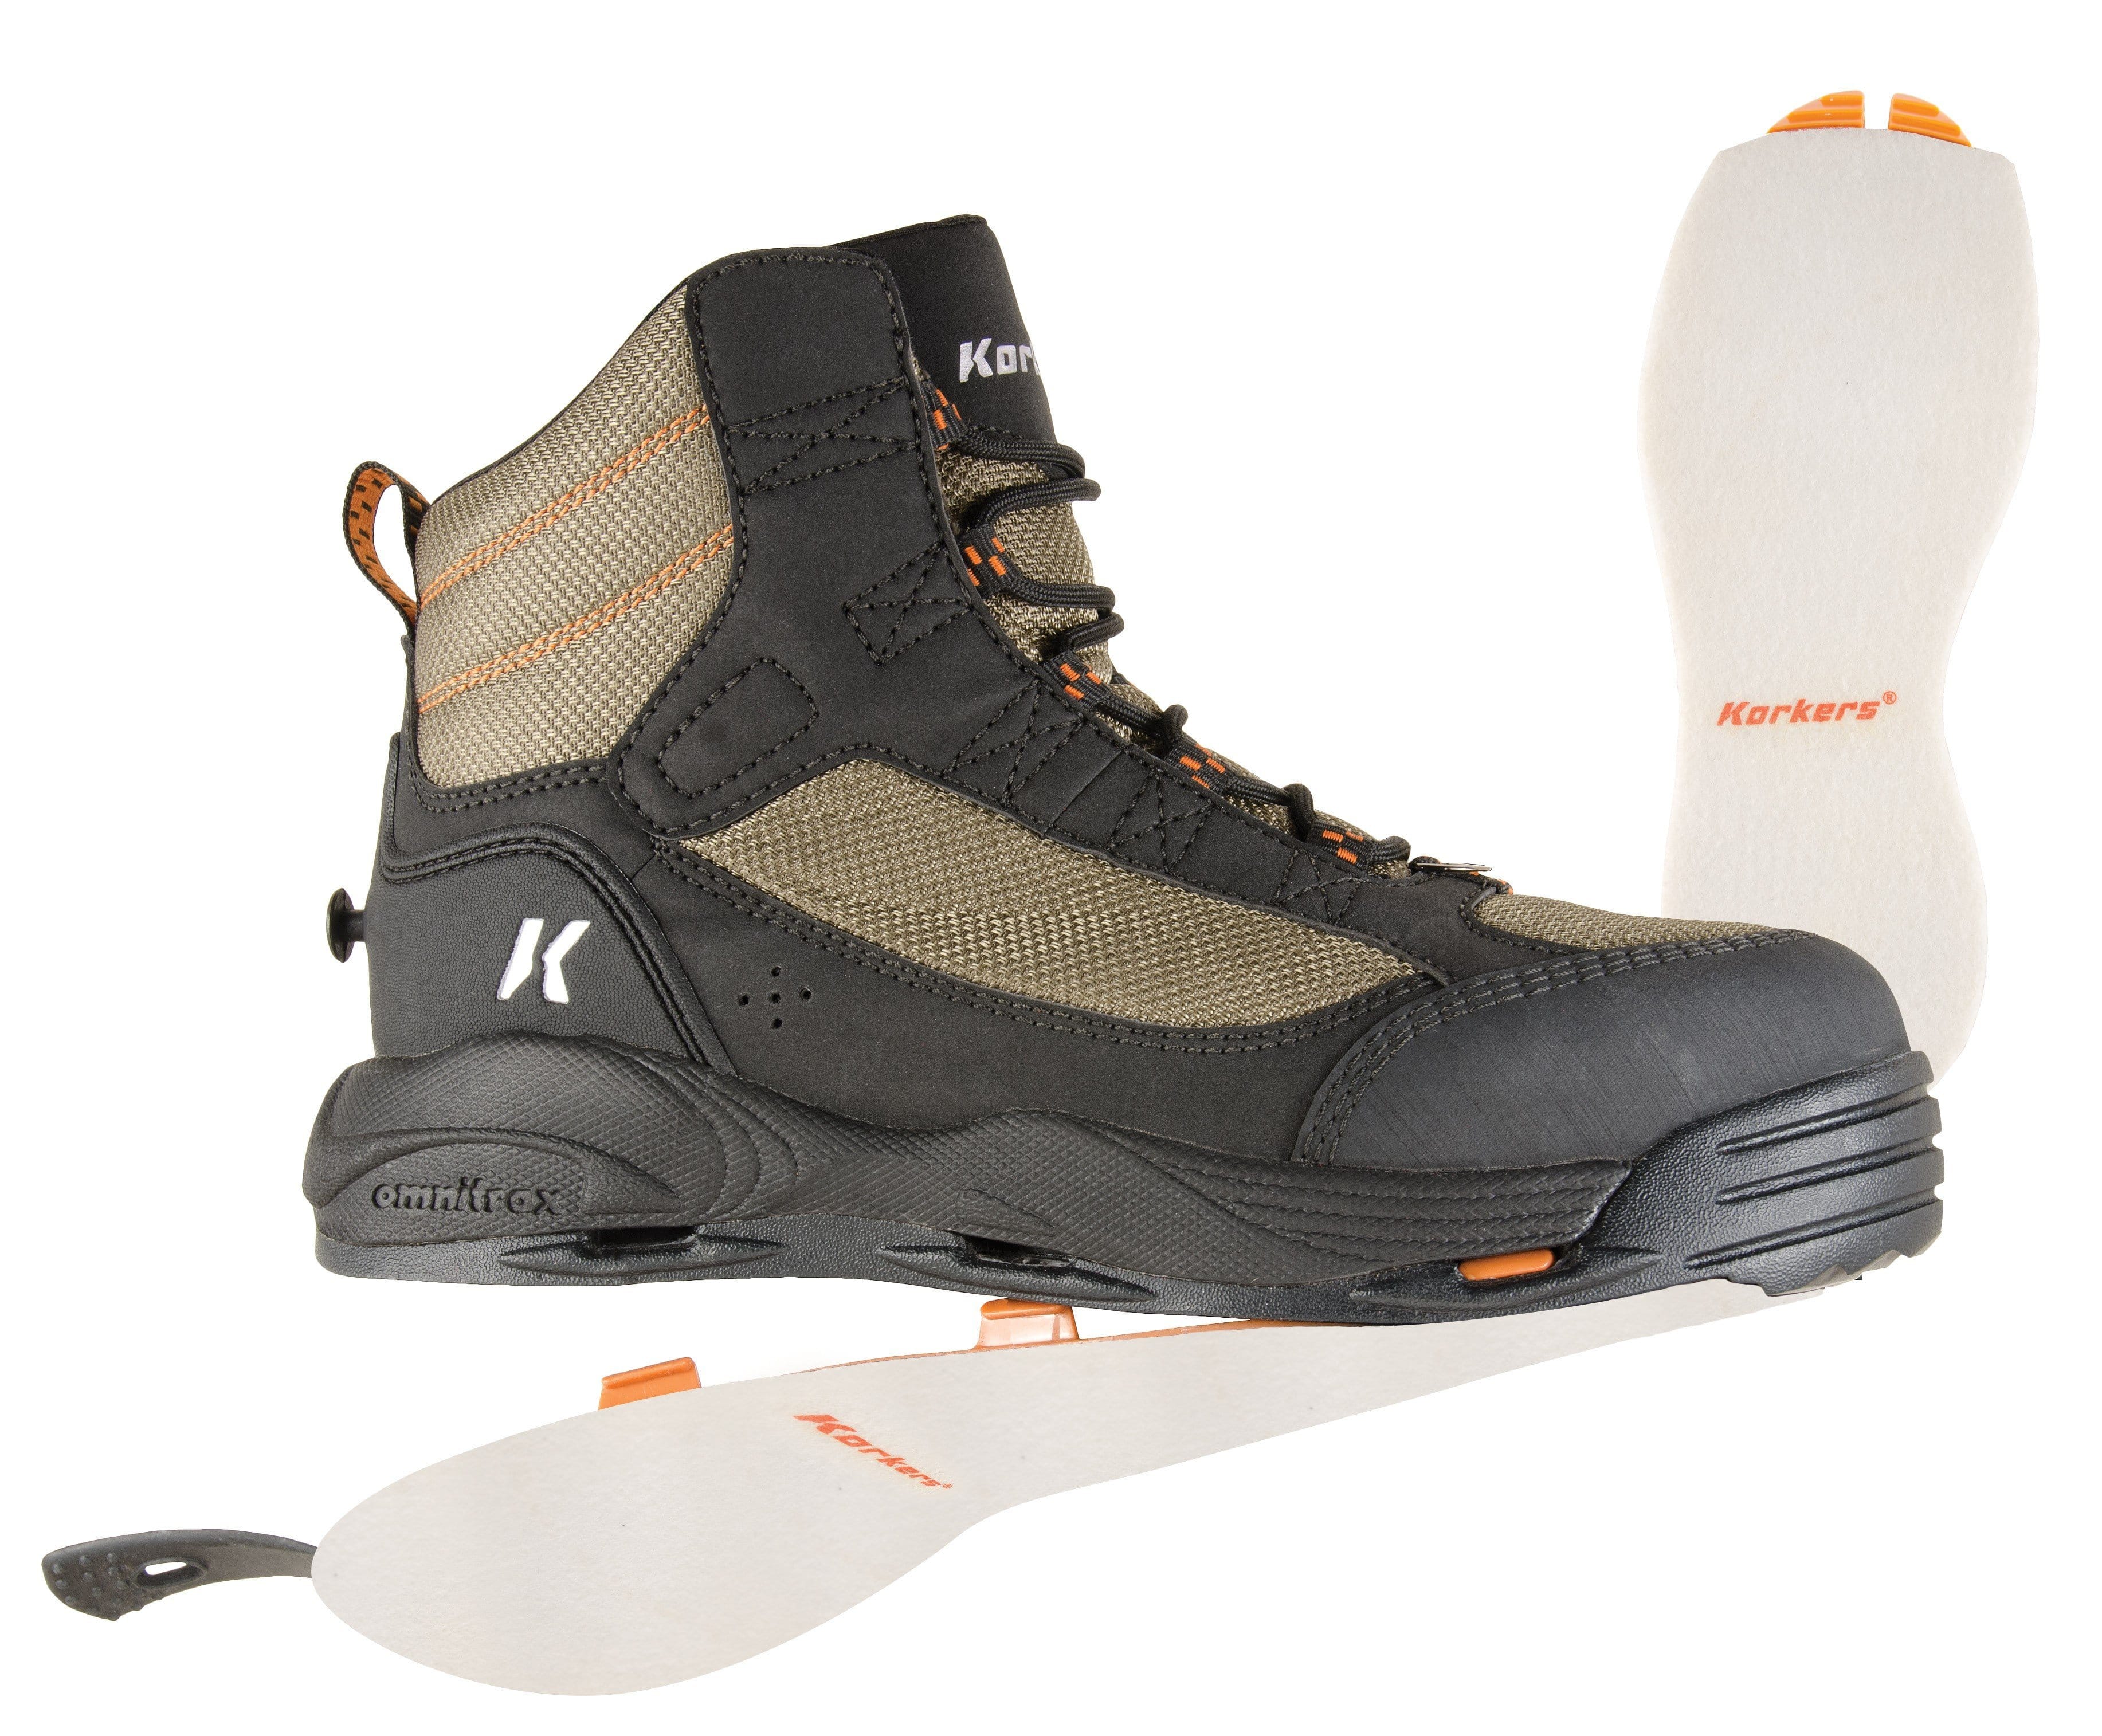 Korkers Greenback Wading Boots - The Saltwater Edge